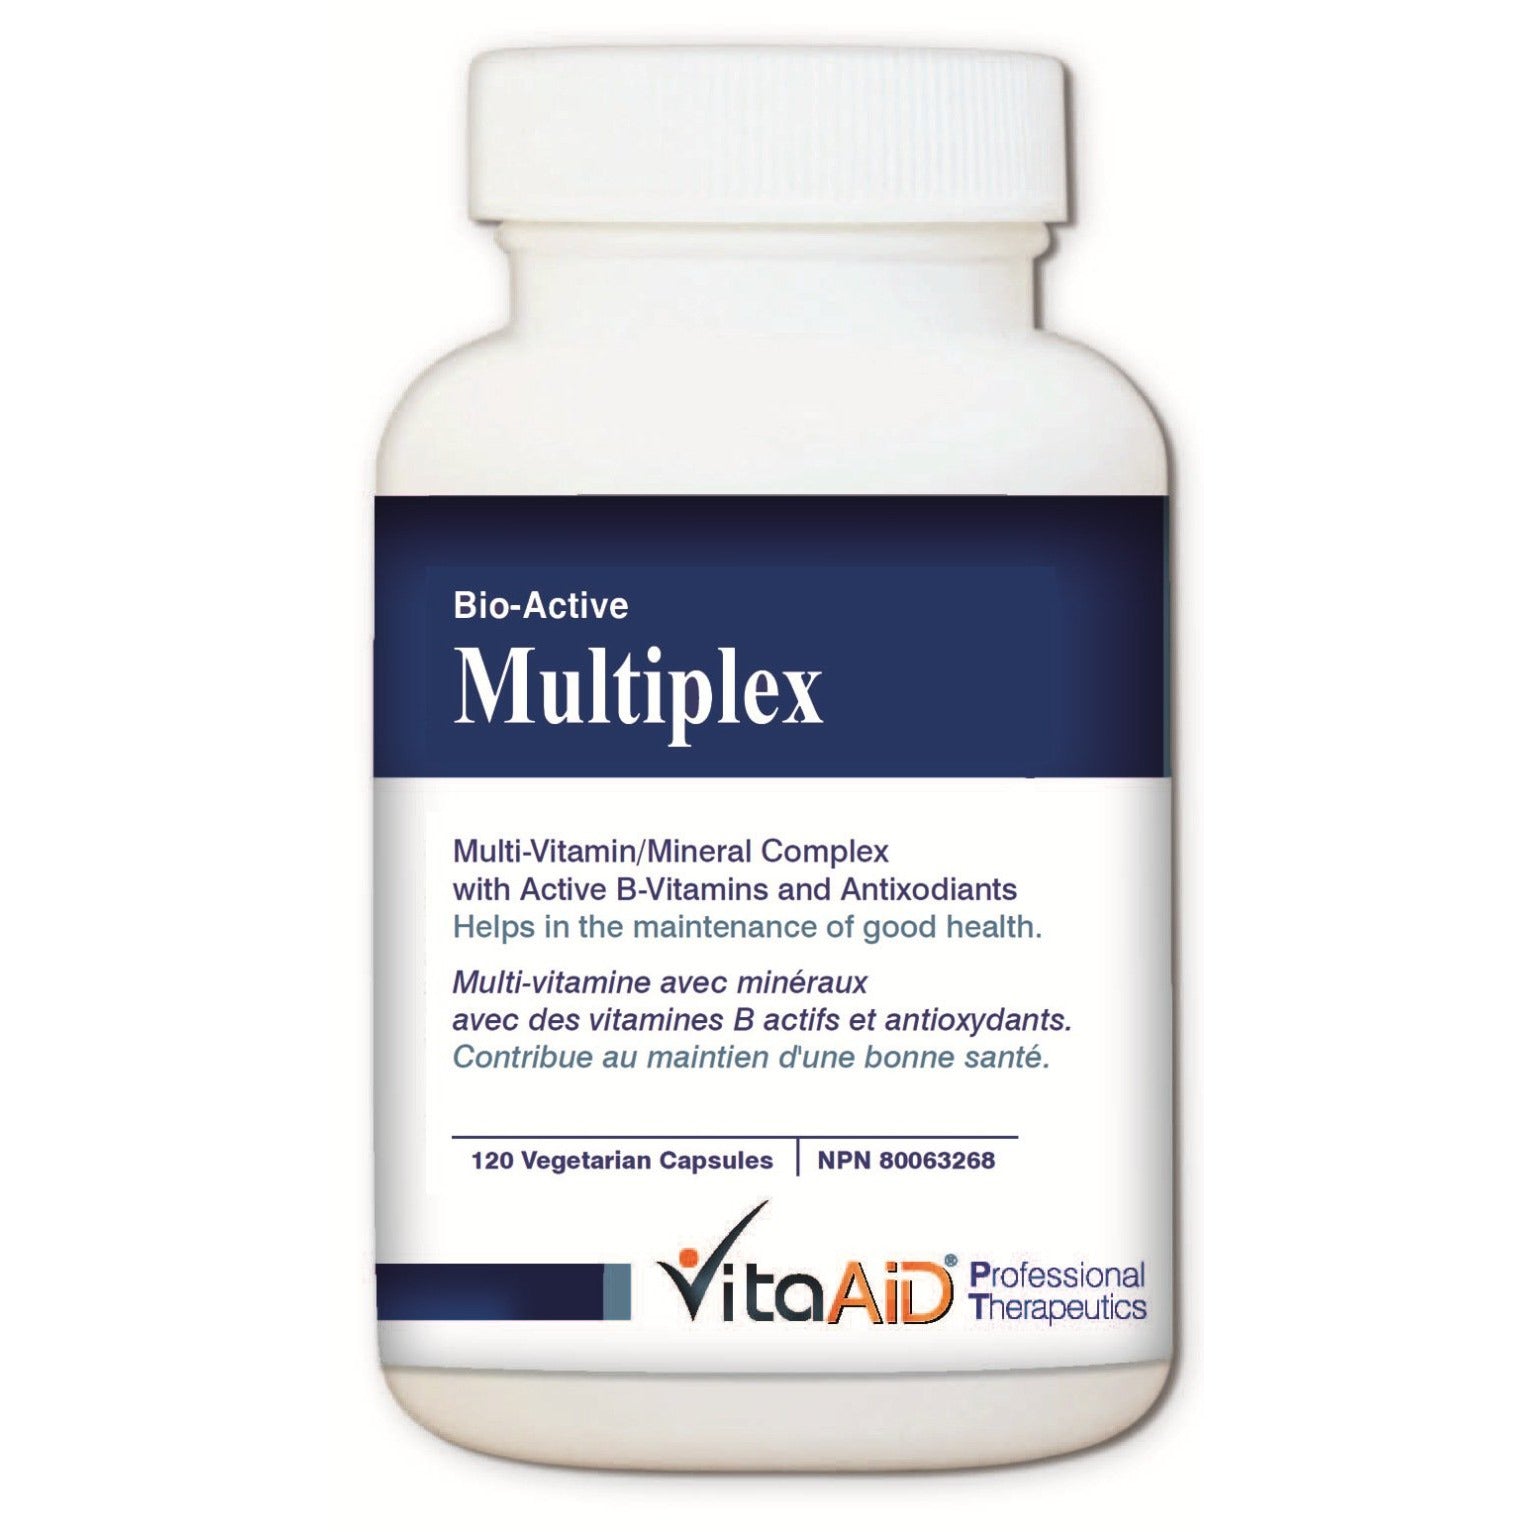 Bio-Active Multiplex Multiple Vitamins and Mineral Complex with Active B-Vitamins for Optimal Methylation, Plus Herbs and Antioxidants 120 veg caps - iwellnessbox